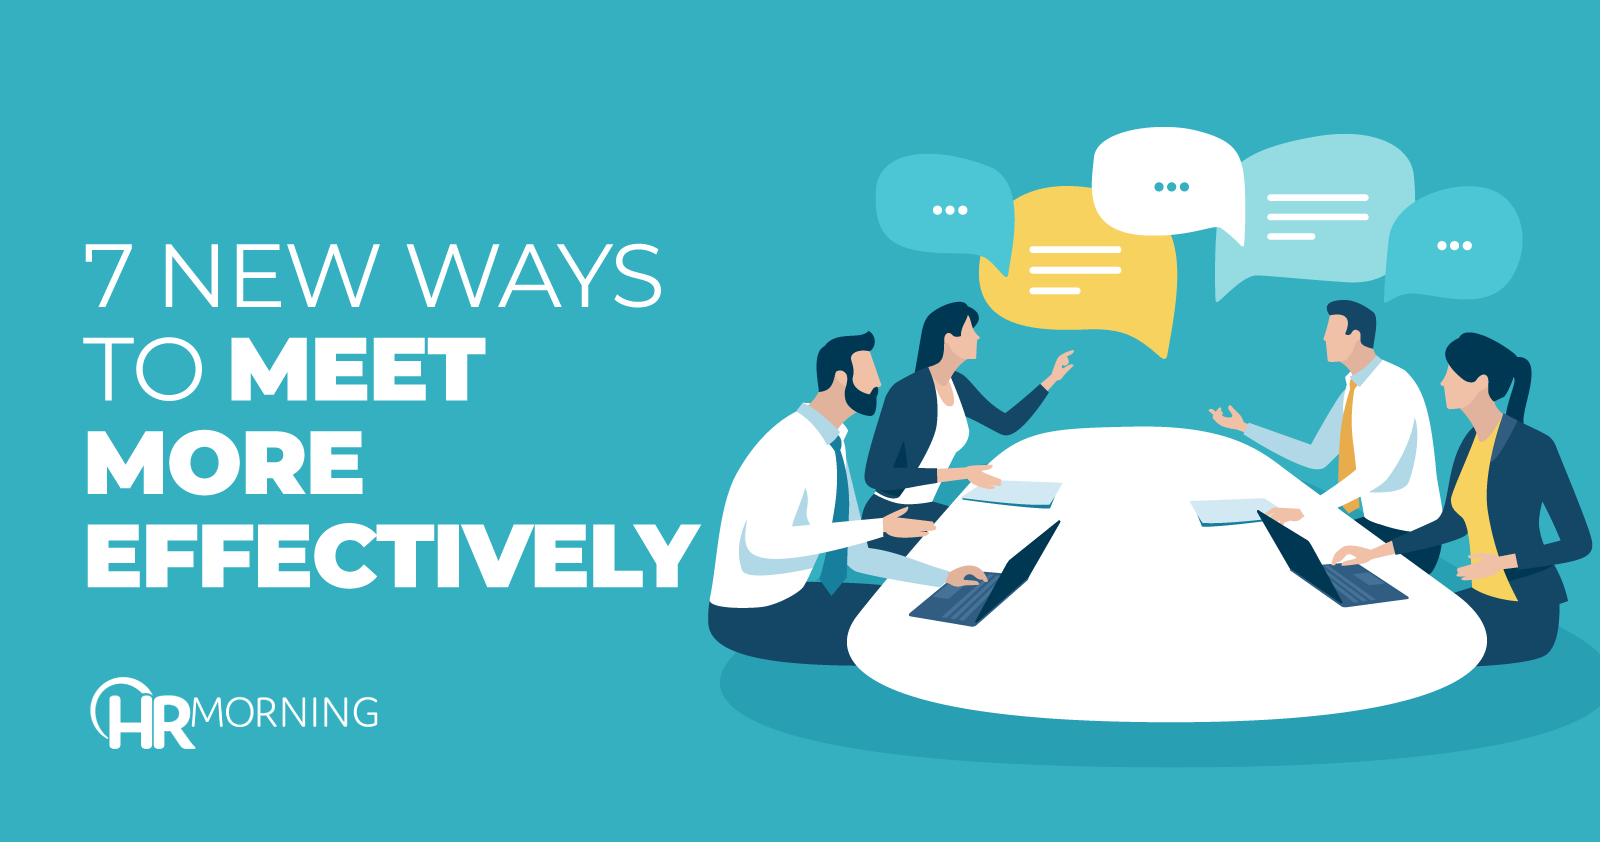 7 new ways to meet more effectively